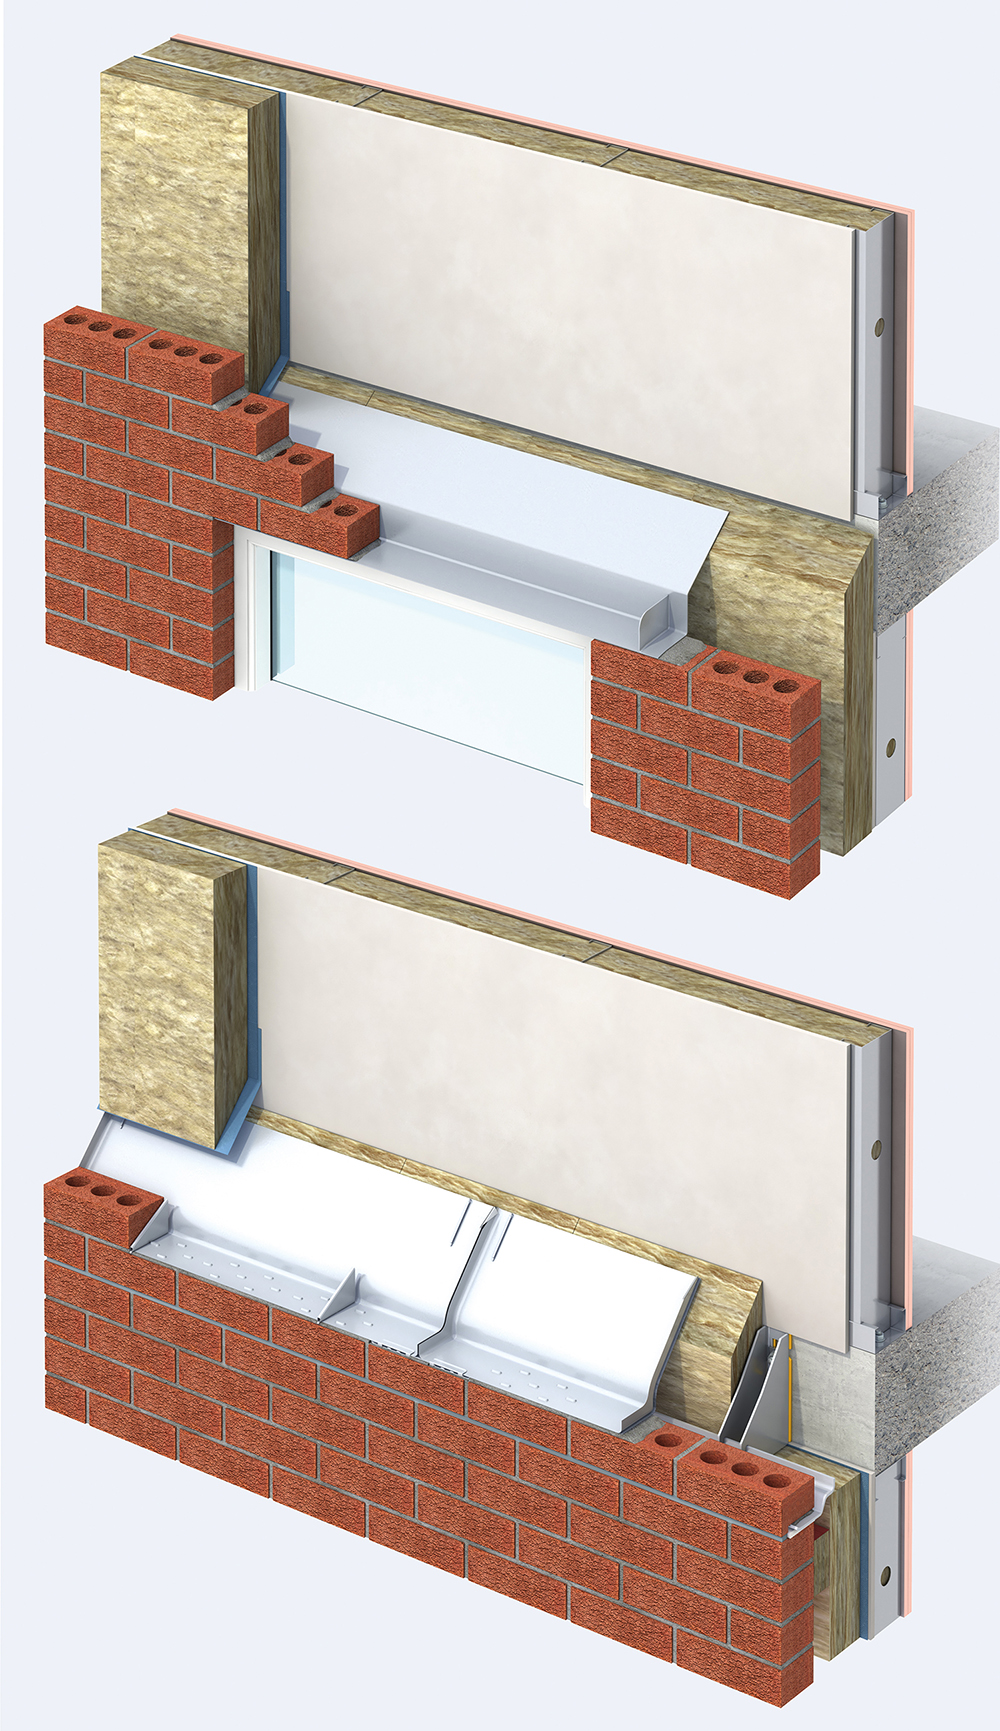  non-combustible cavity trays